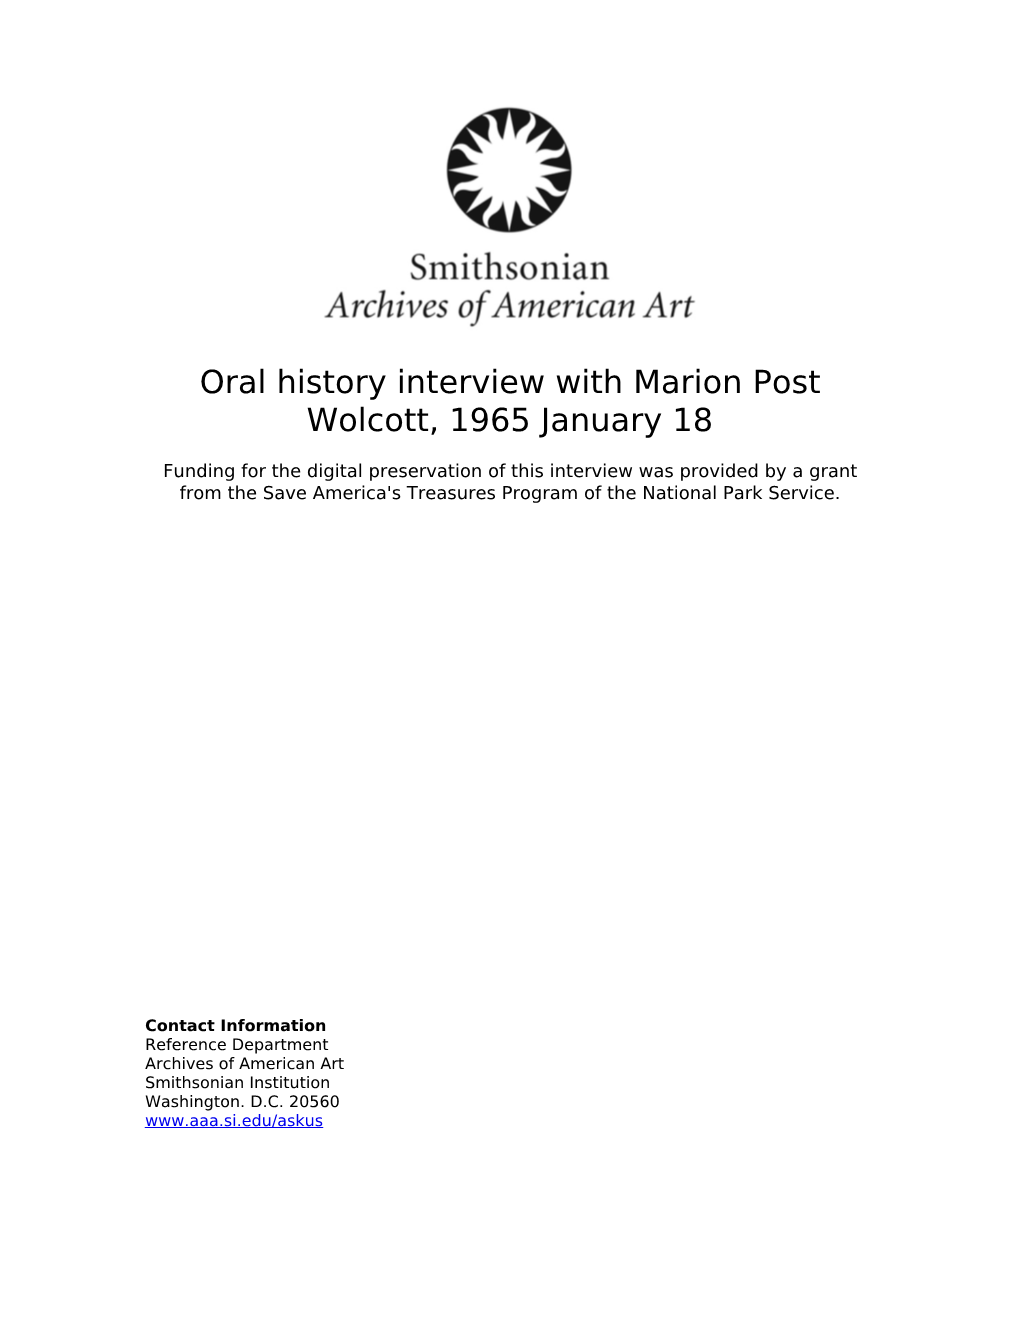 Oral History Interview with Marion Post Wolcott, 1965 January 18